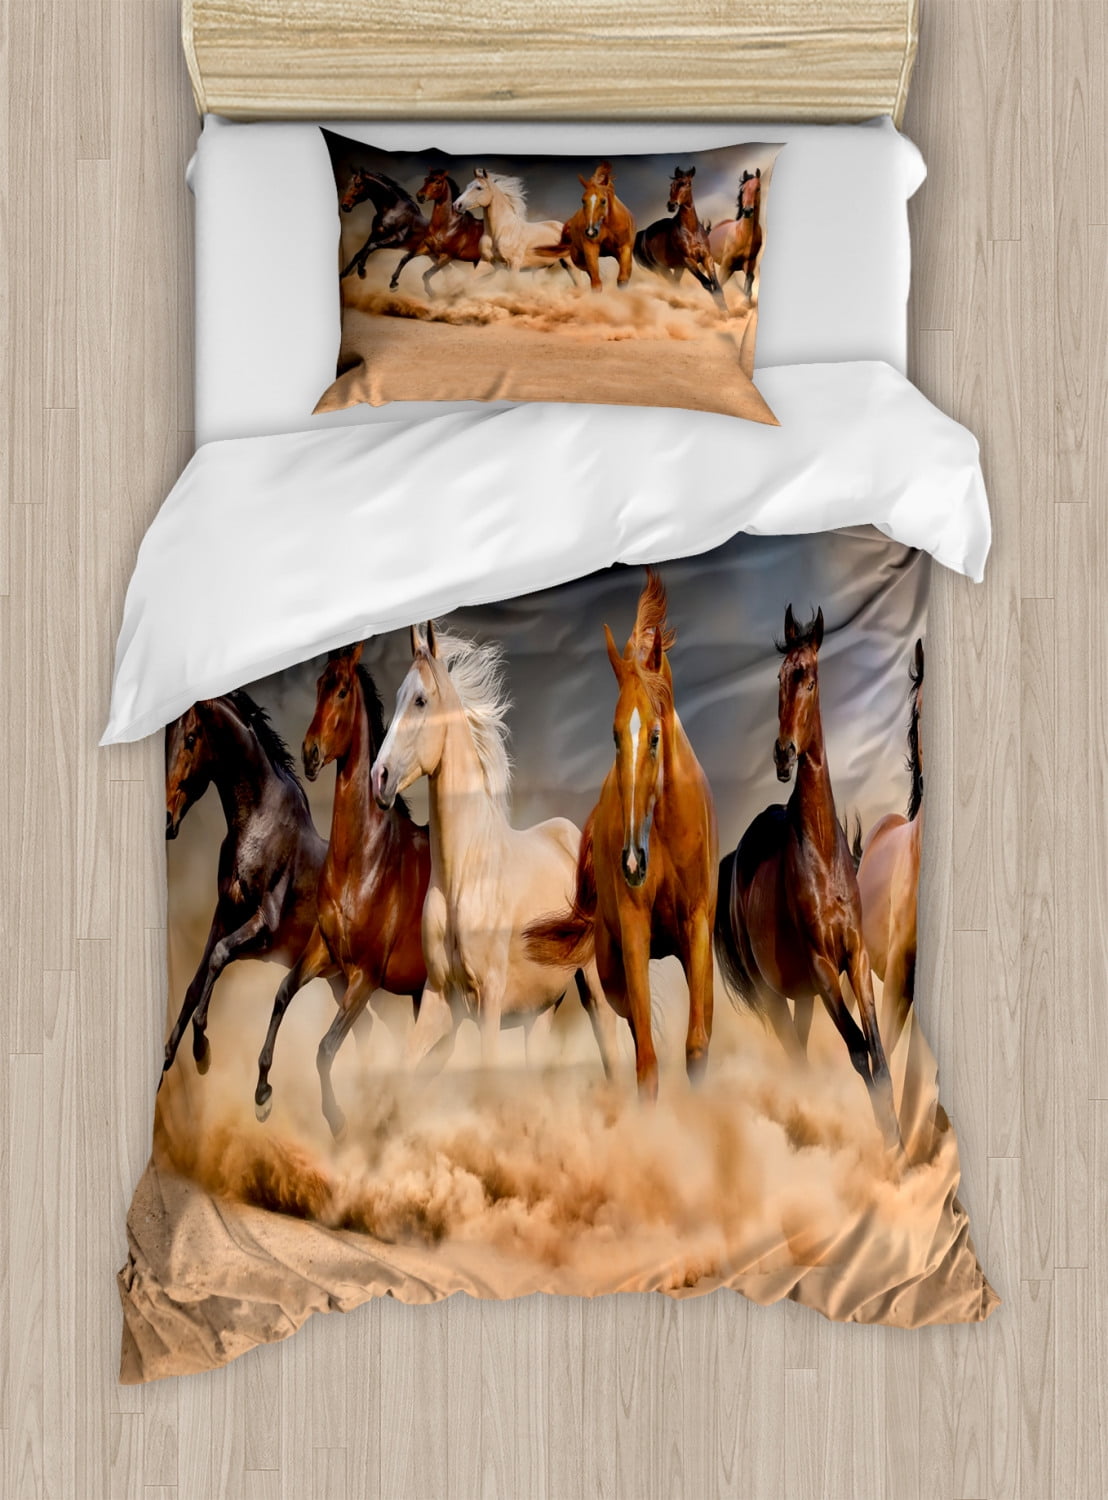 RUNNING HORSE PONY DESIGN DOUBLE DUVET COVER SET WITH PILLOWCASE 